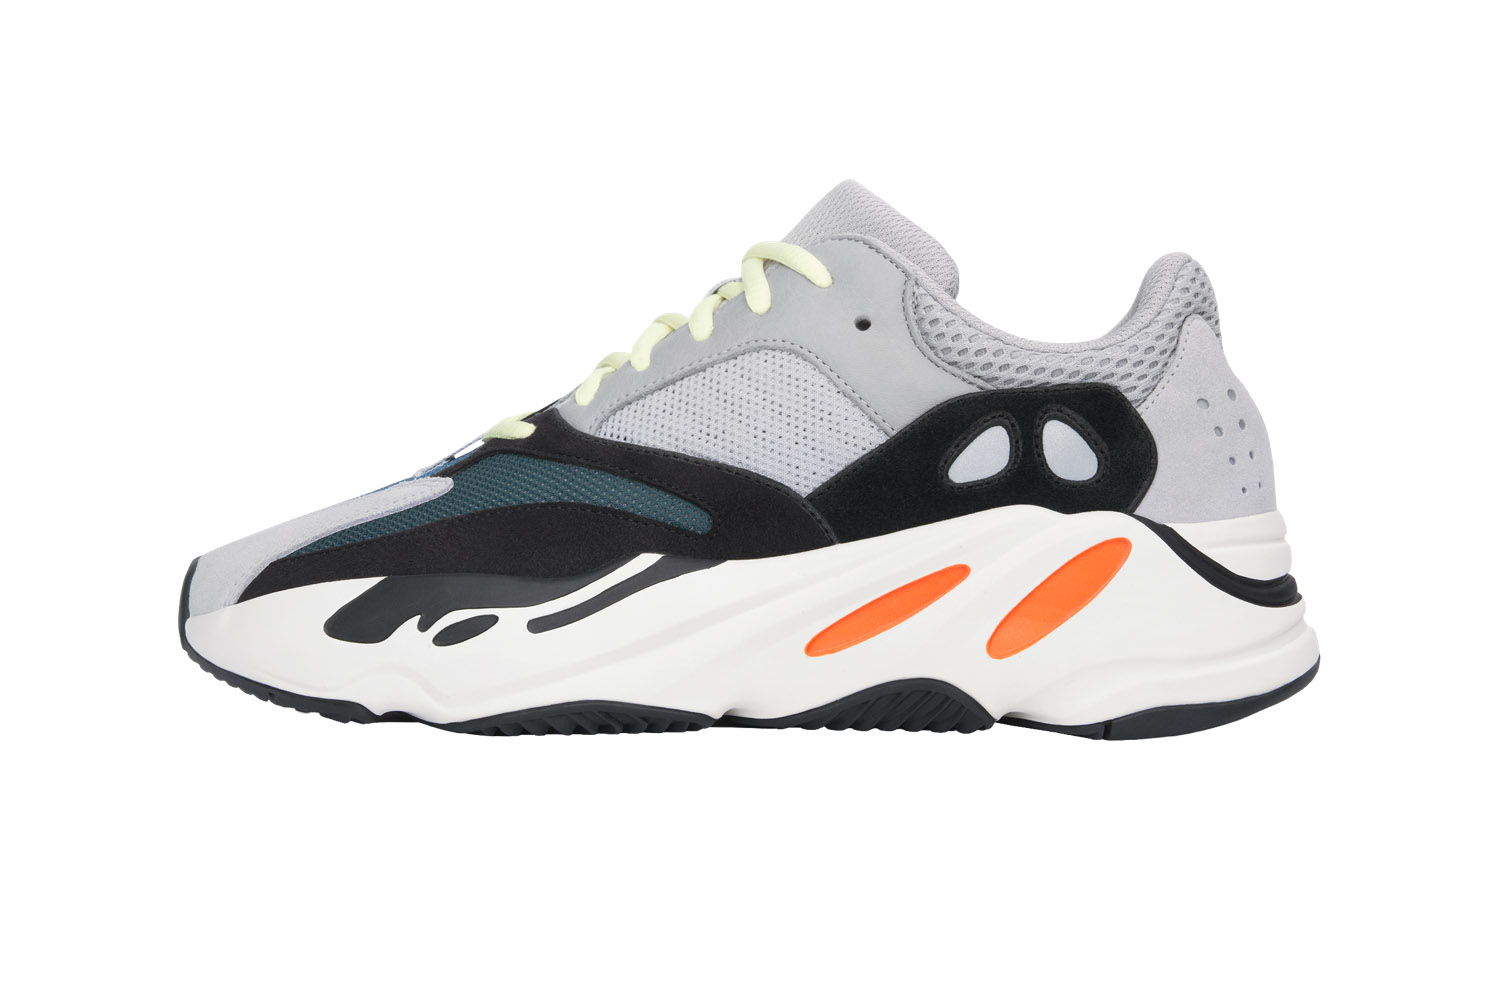 yeezy 700 end clothing